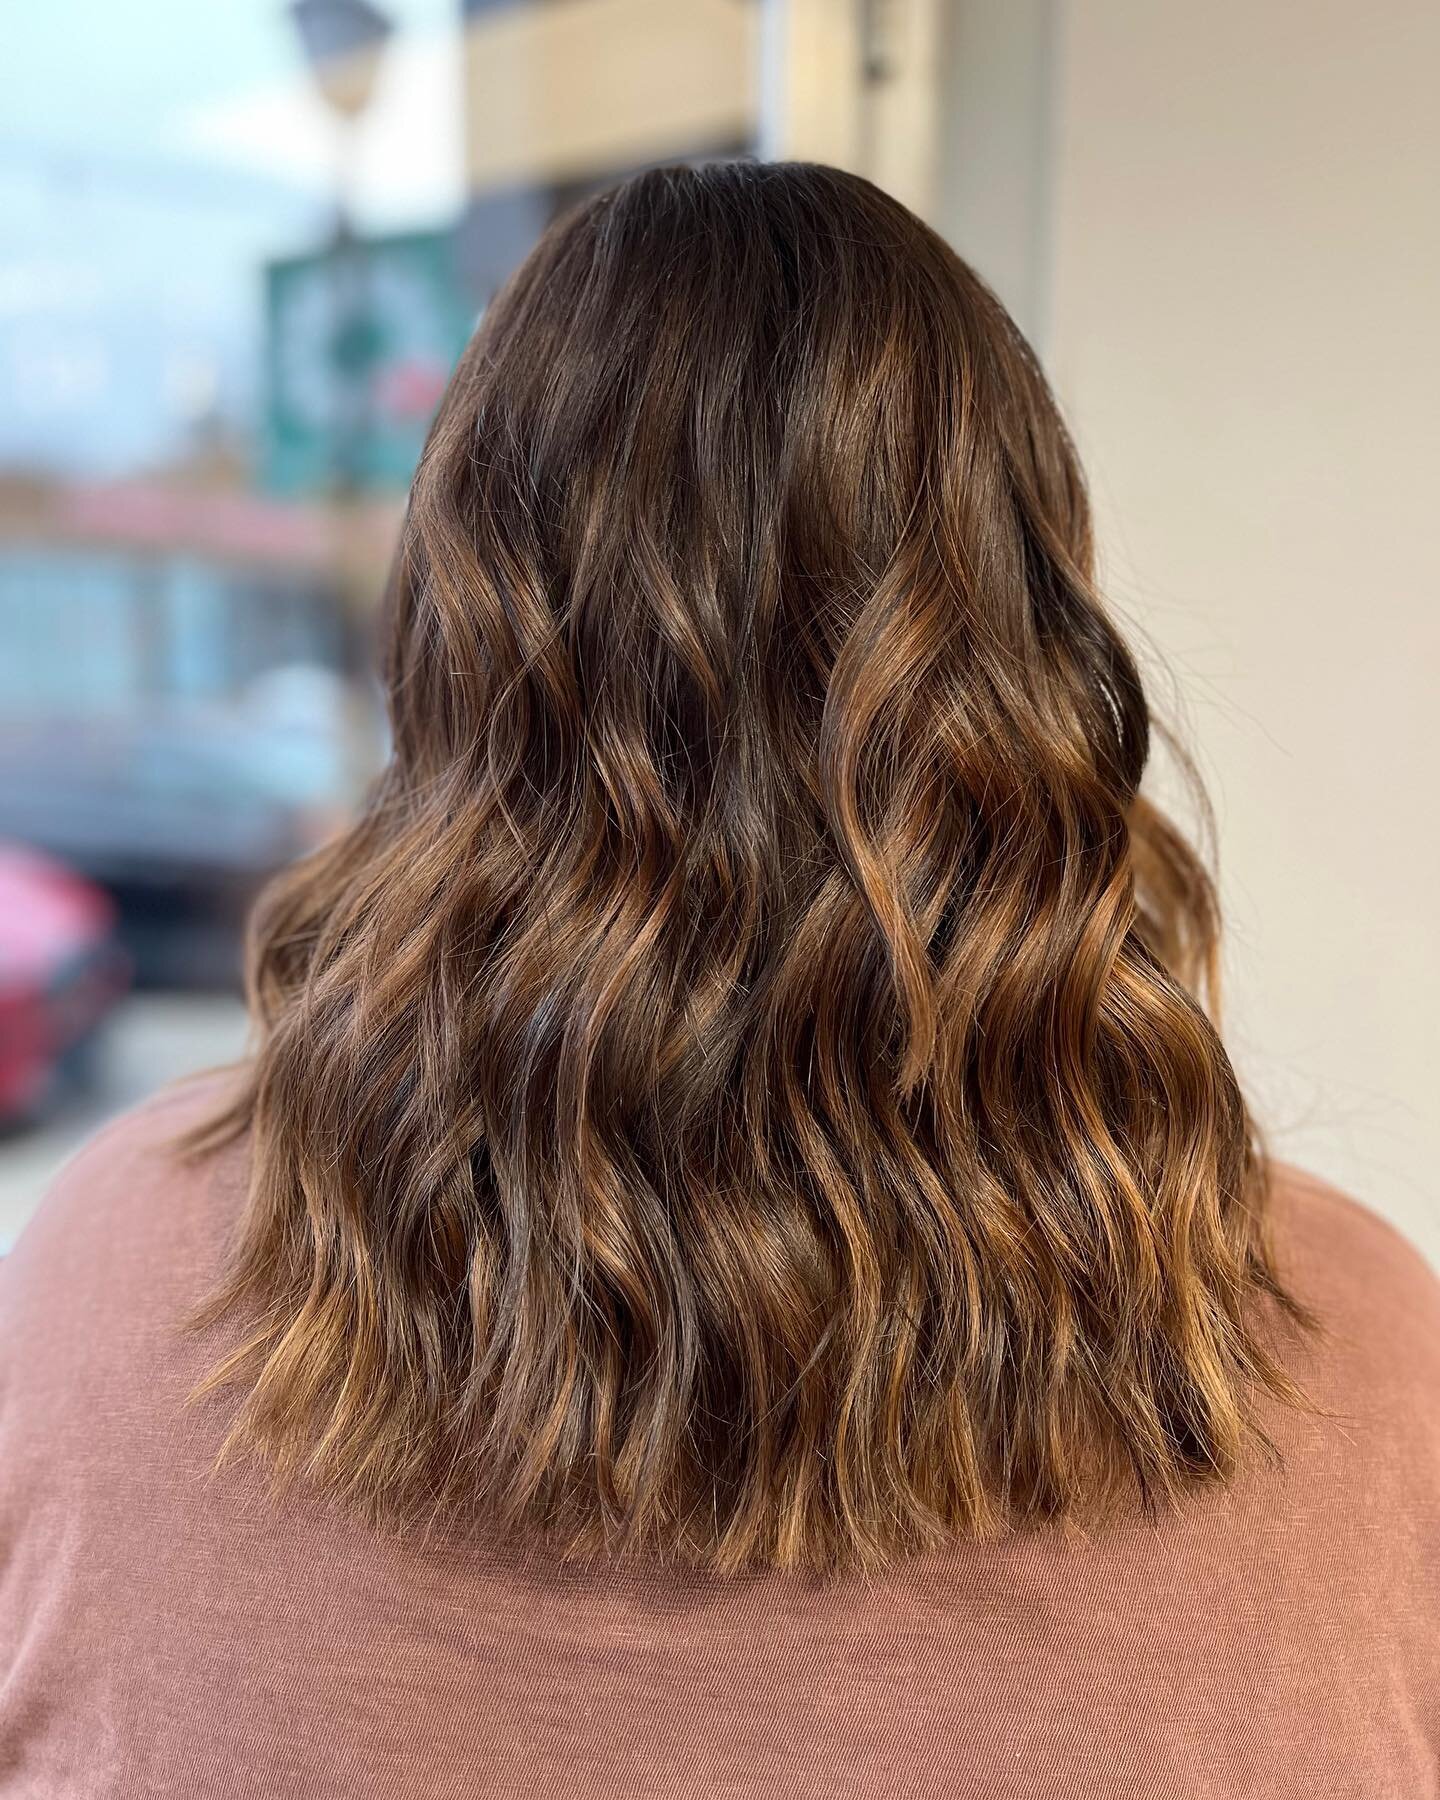 GORGEOUS tones by @brittney.at.theshopsalon
⠀⠀⠀⠀⠀⠀⠀⠀⠀
BOOK ONLINE 24/7!
Link in BIO or WWW.THESHOPSTYLEHOUSE.COM
⠀⠀⠀⠀⠀⠀⠀⠀⠀
⠀⠀⠀⠀⠀⠀⠀⠀⠀
💻  𝐰𝐰𝐰.𝐭𝐡𝐞𝐬𝐡𝐨𝐩𝐬𝐭𝐲𝐥𝐞𝐡𝐨𝐮𝐬𝐞.𝐜𝐨𝗺​​​​​​​​⠀⠀⠀⠀⠀⠀⠀⠀⠀​​​​​​​​
📧 𝐀𝐩𝐩𝐨𝐢𝐧𝐭𝗺𝐞𝐧𝐭𝐬@𝐭𝐡𝐞𝐬𝐡?